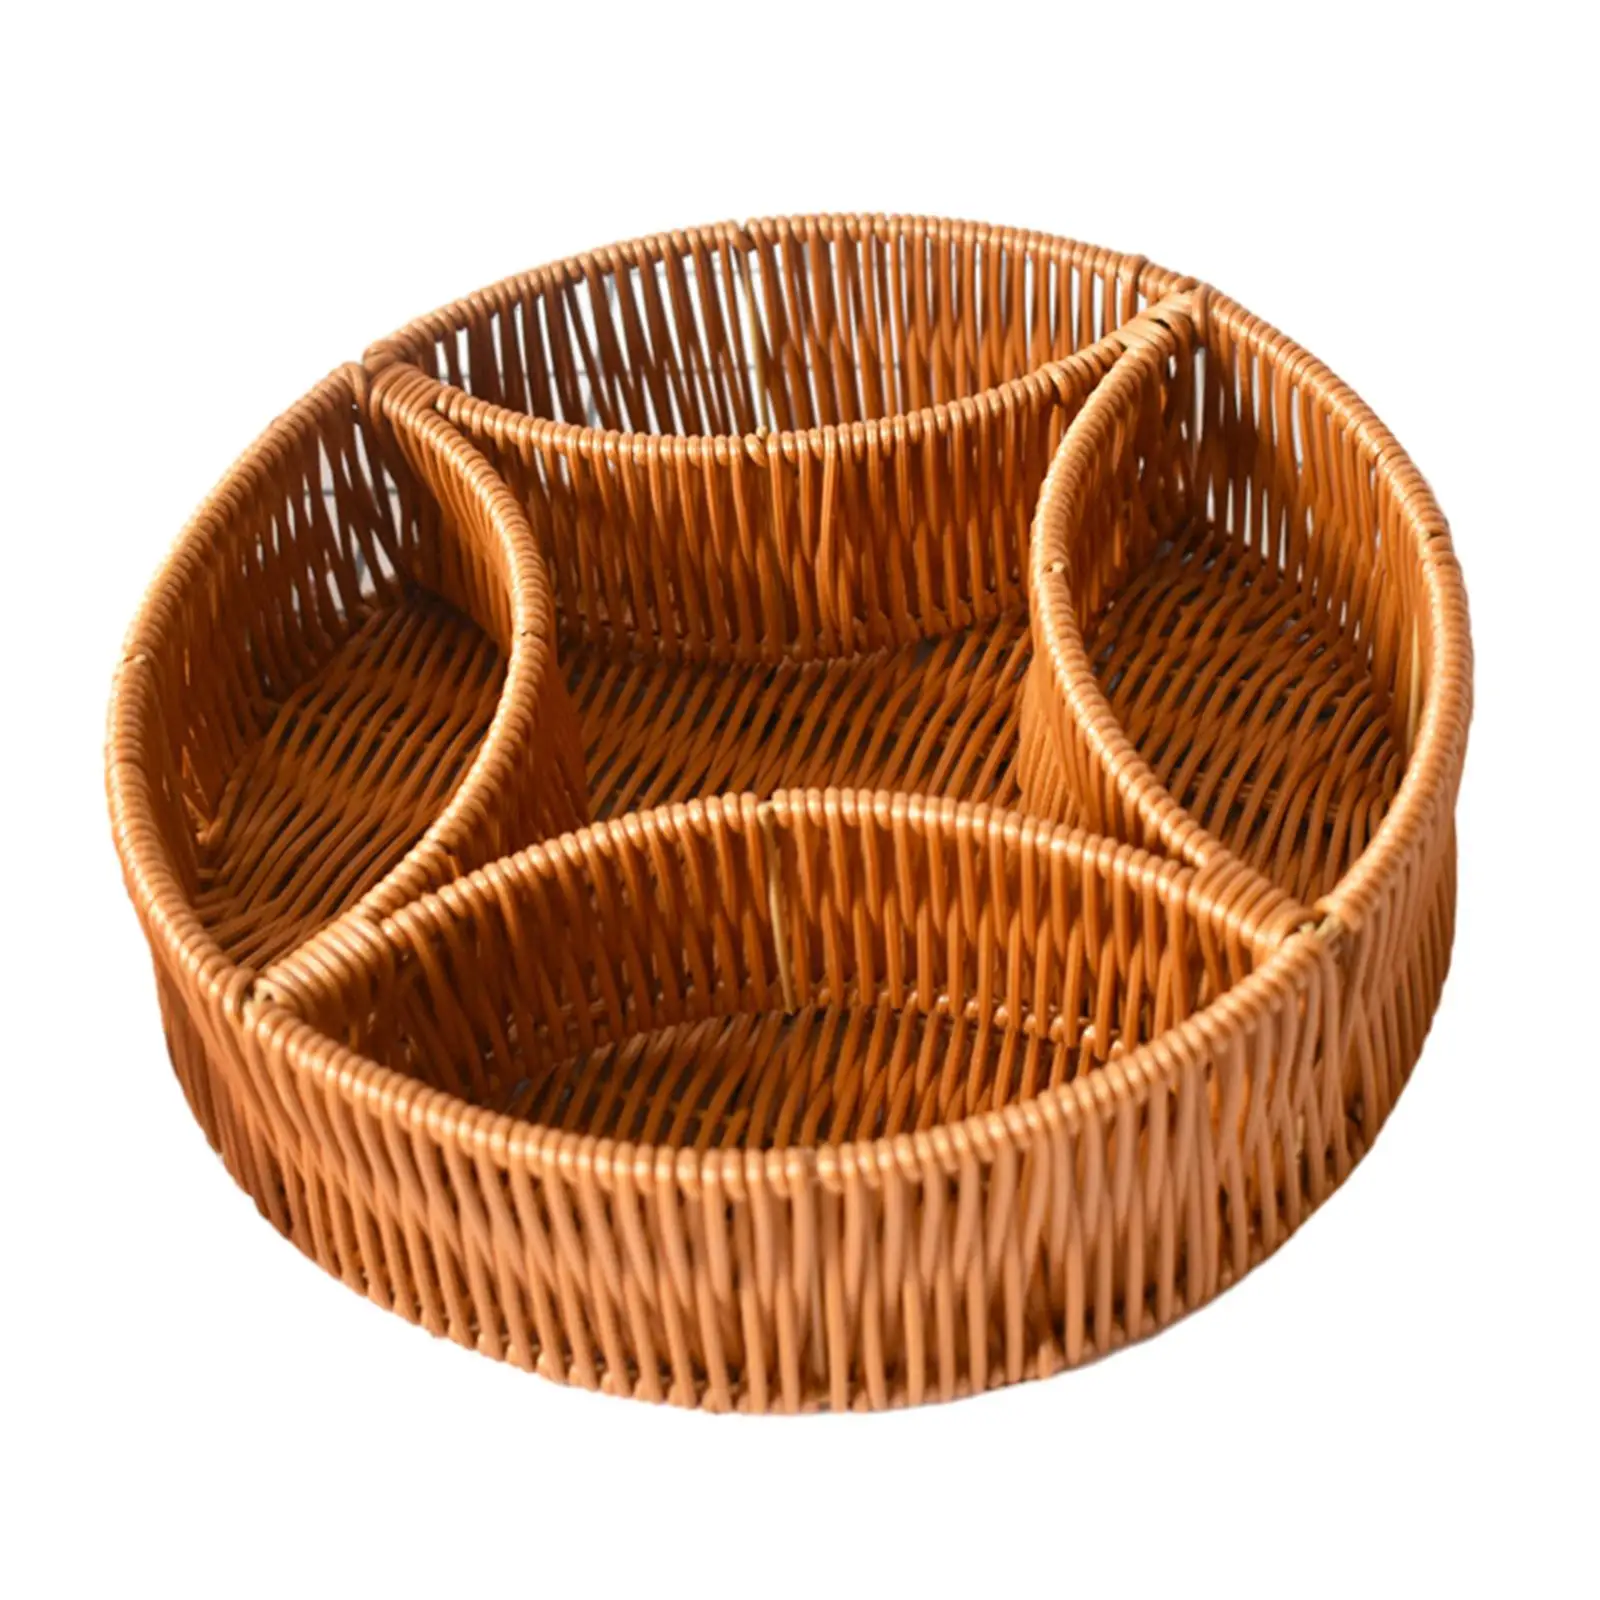 Hand Woven Serving Basket Candy Serving Tray Rustic Snack Platter Tray Farmhouse Home Décor for Hotel Pantry Dining